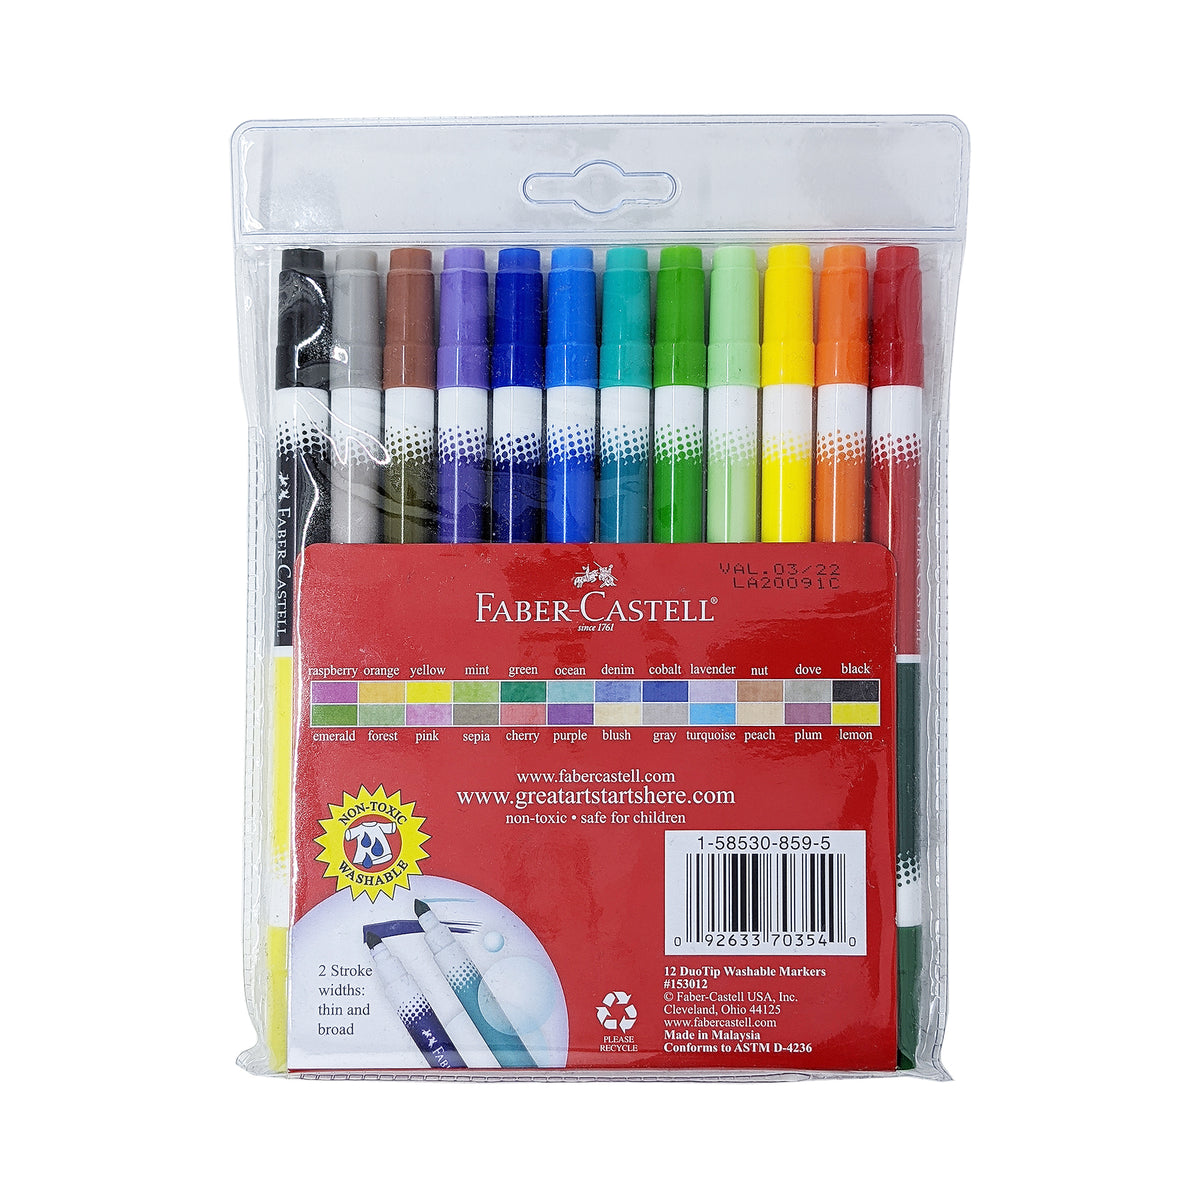 DuoTip Washable Markers (12 pack) with 24 different Colors– Let's Make Art